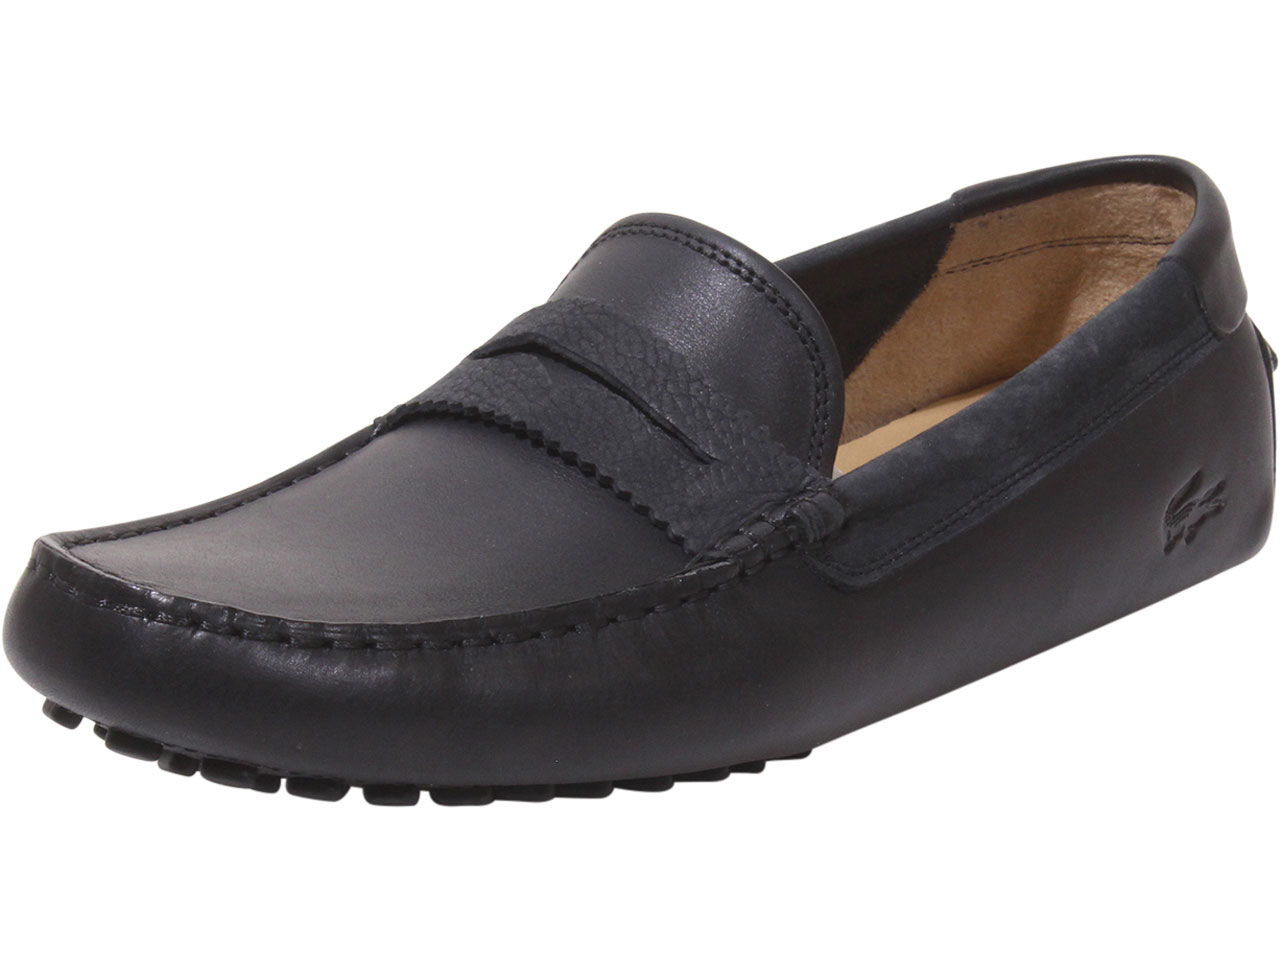 Lacoste Men's Concours-Craft Driving Loafers Black/Tan Sz: 9.5 7 ...